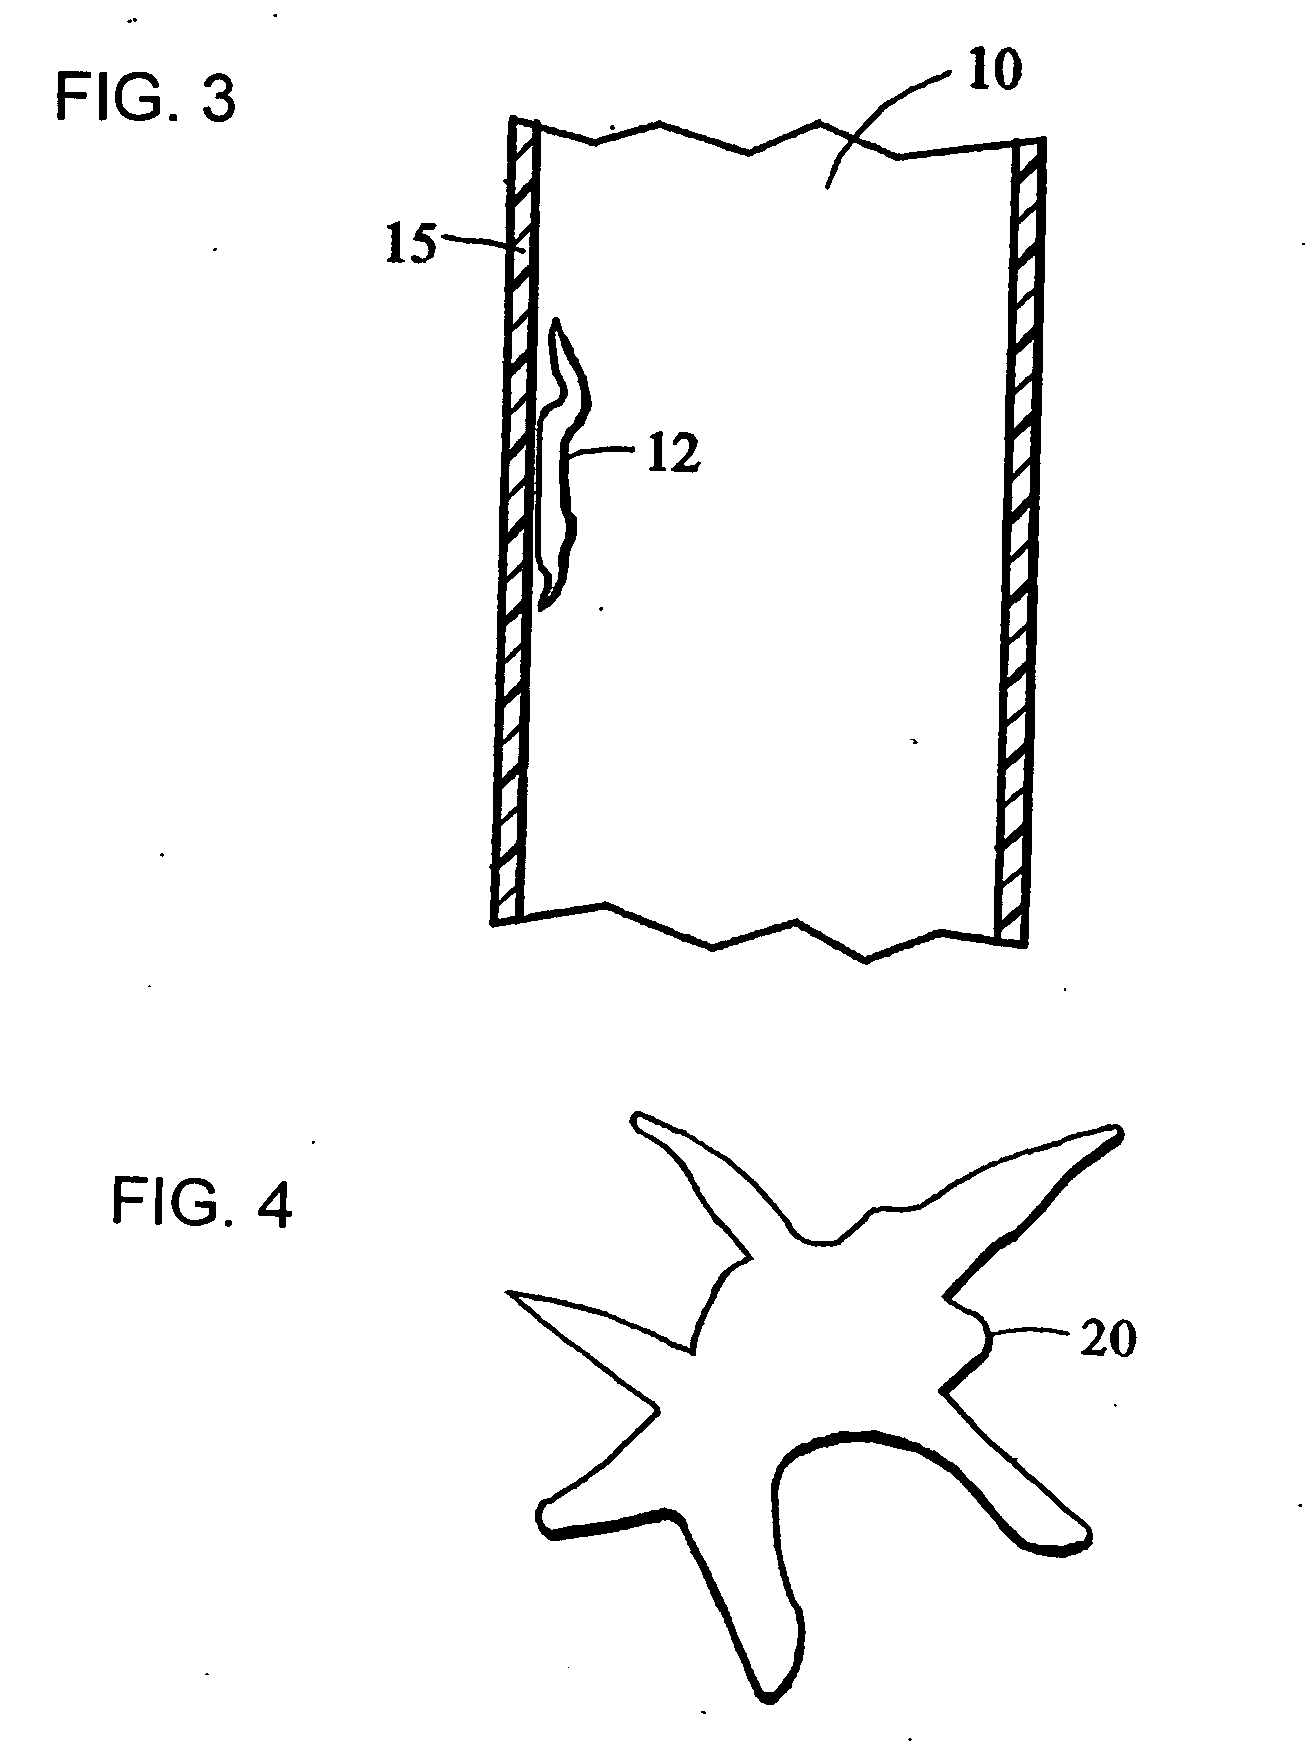 Methods for producing functional antigen presenting dendritic cells using biodegradable microparticles for delivery of antigenic materials